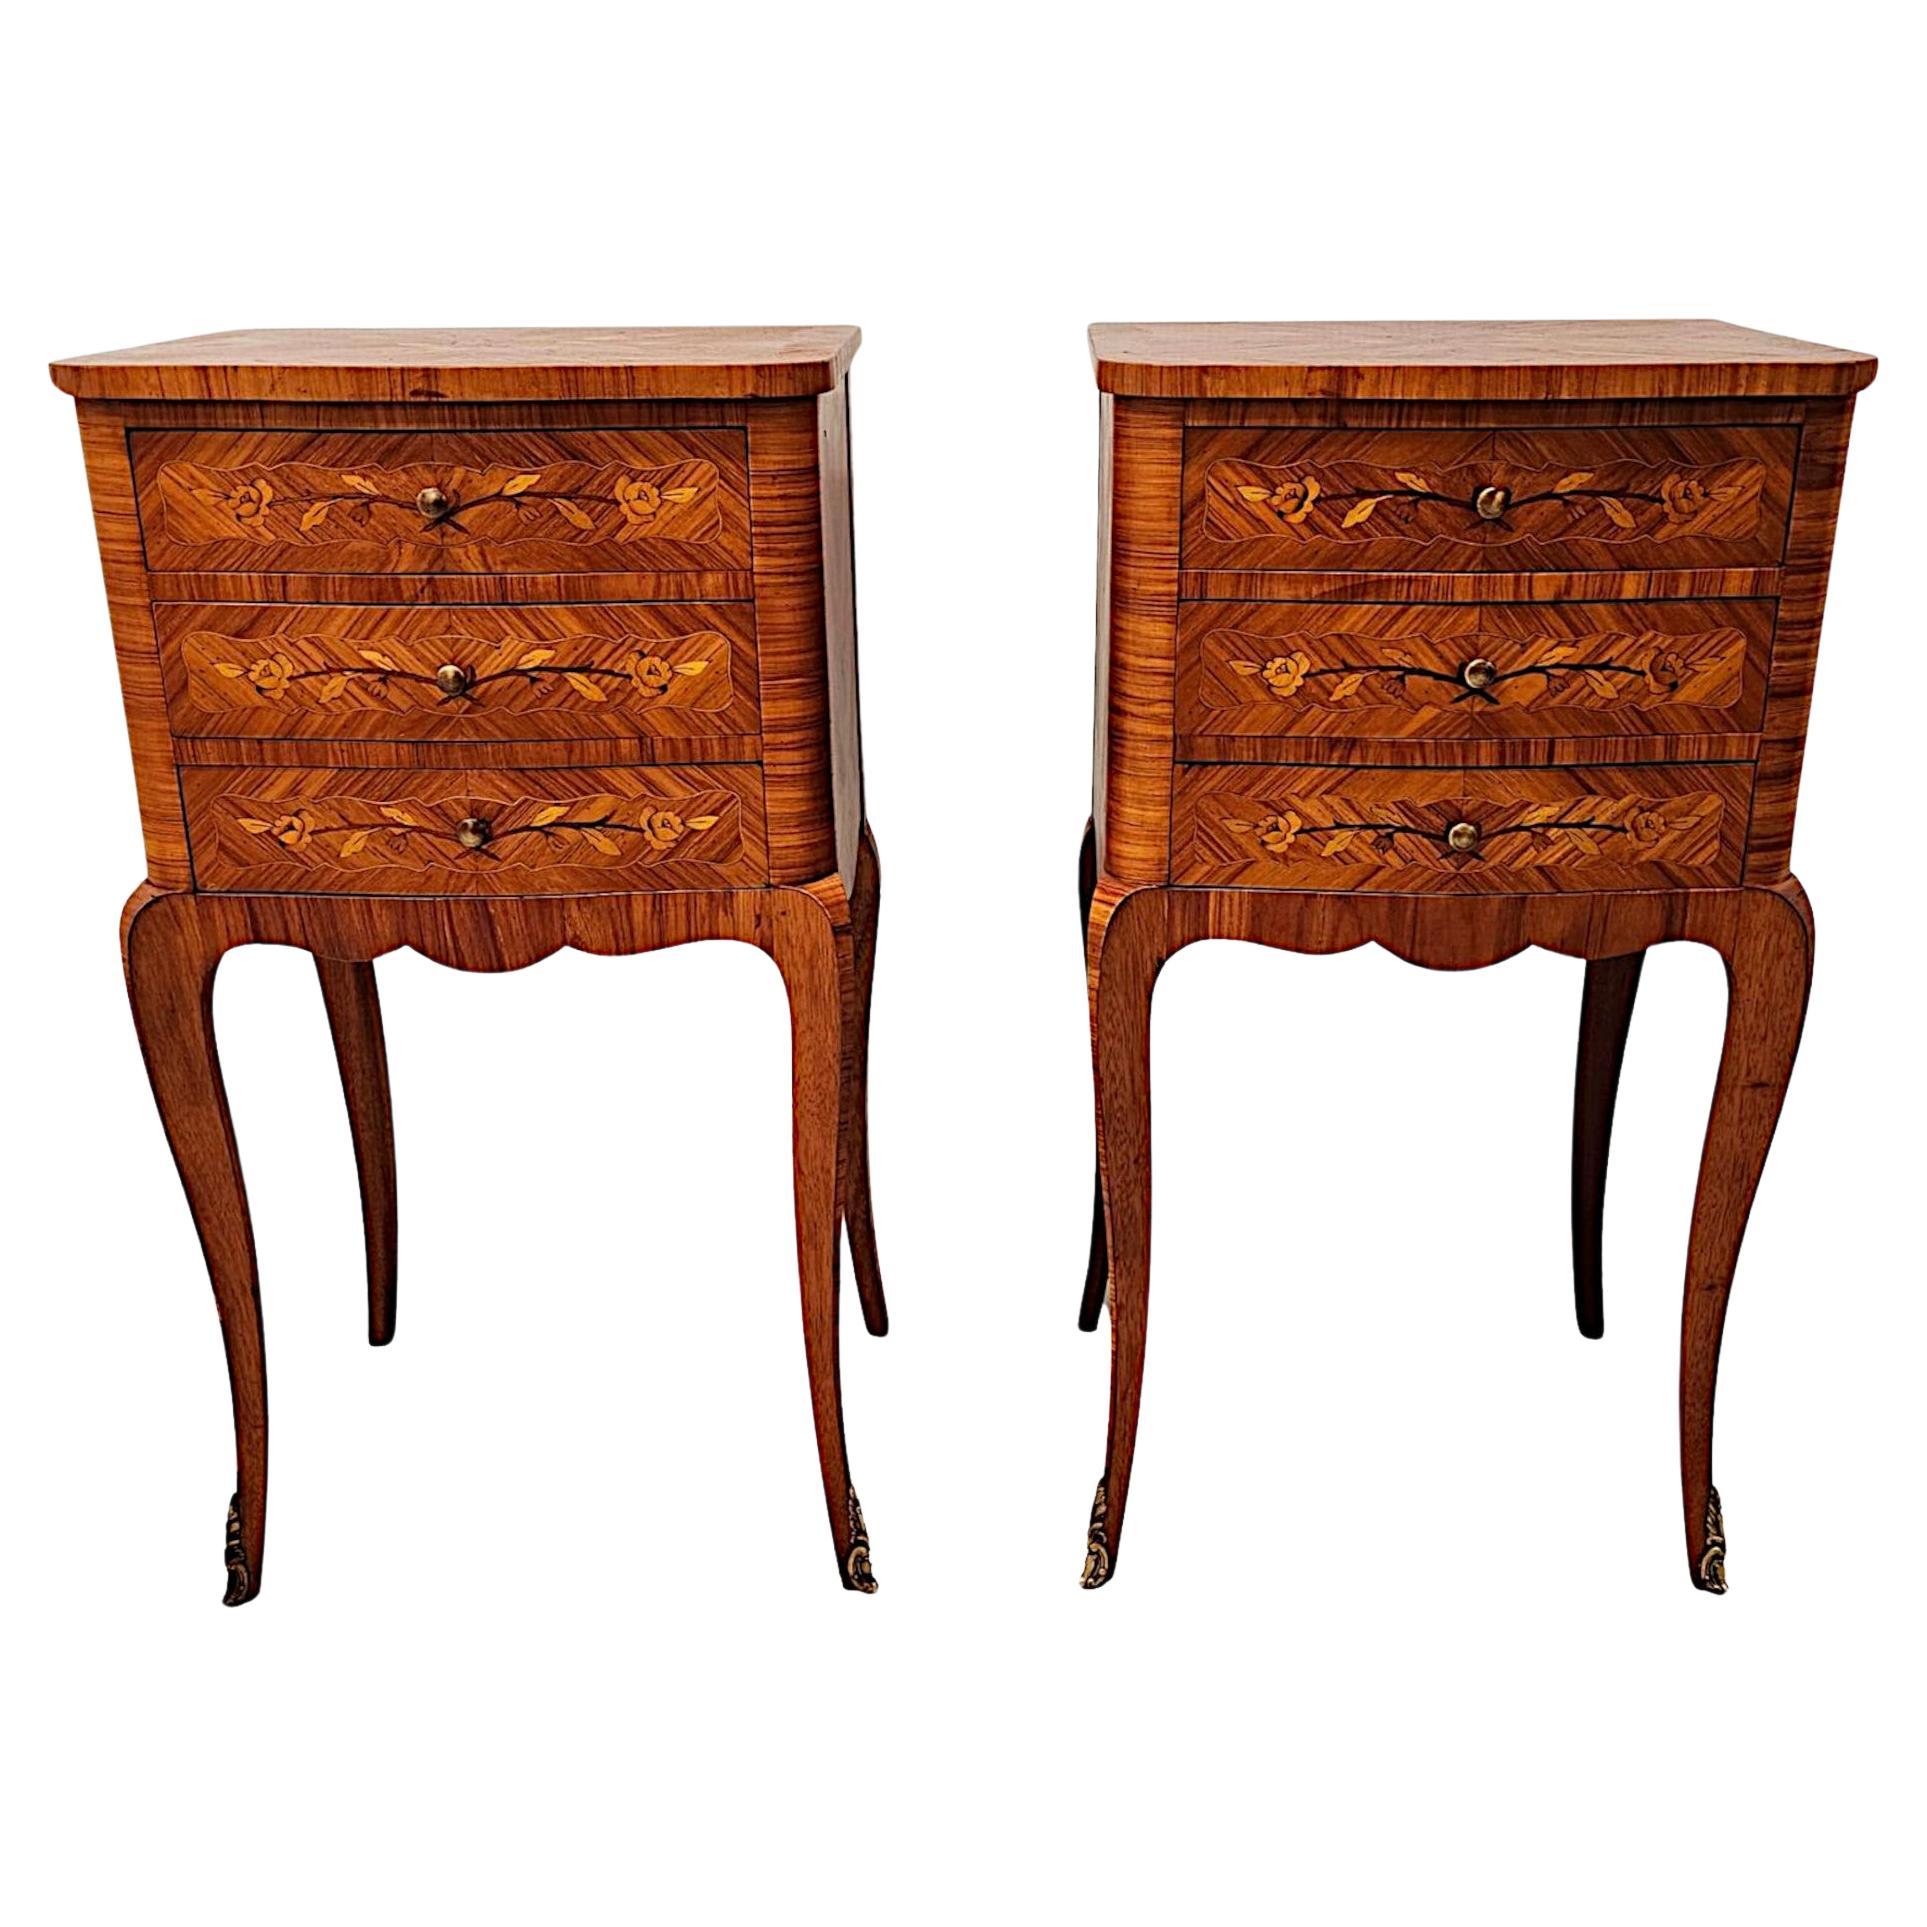 A Fabulous Pair of Early 20th Century Marquetry Inlaid Bedside Tables or Chests